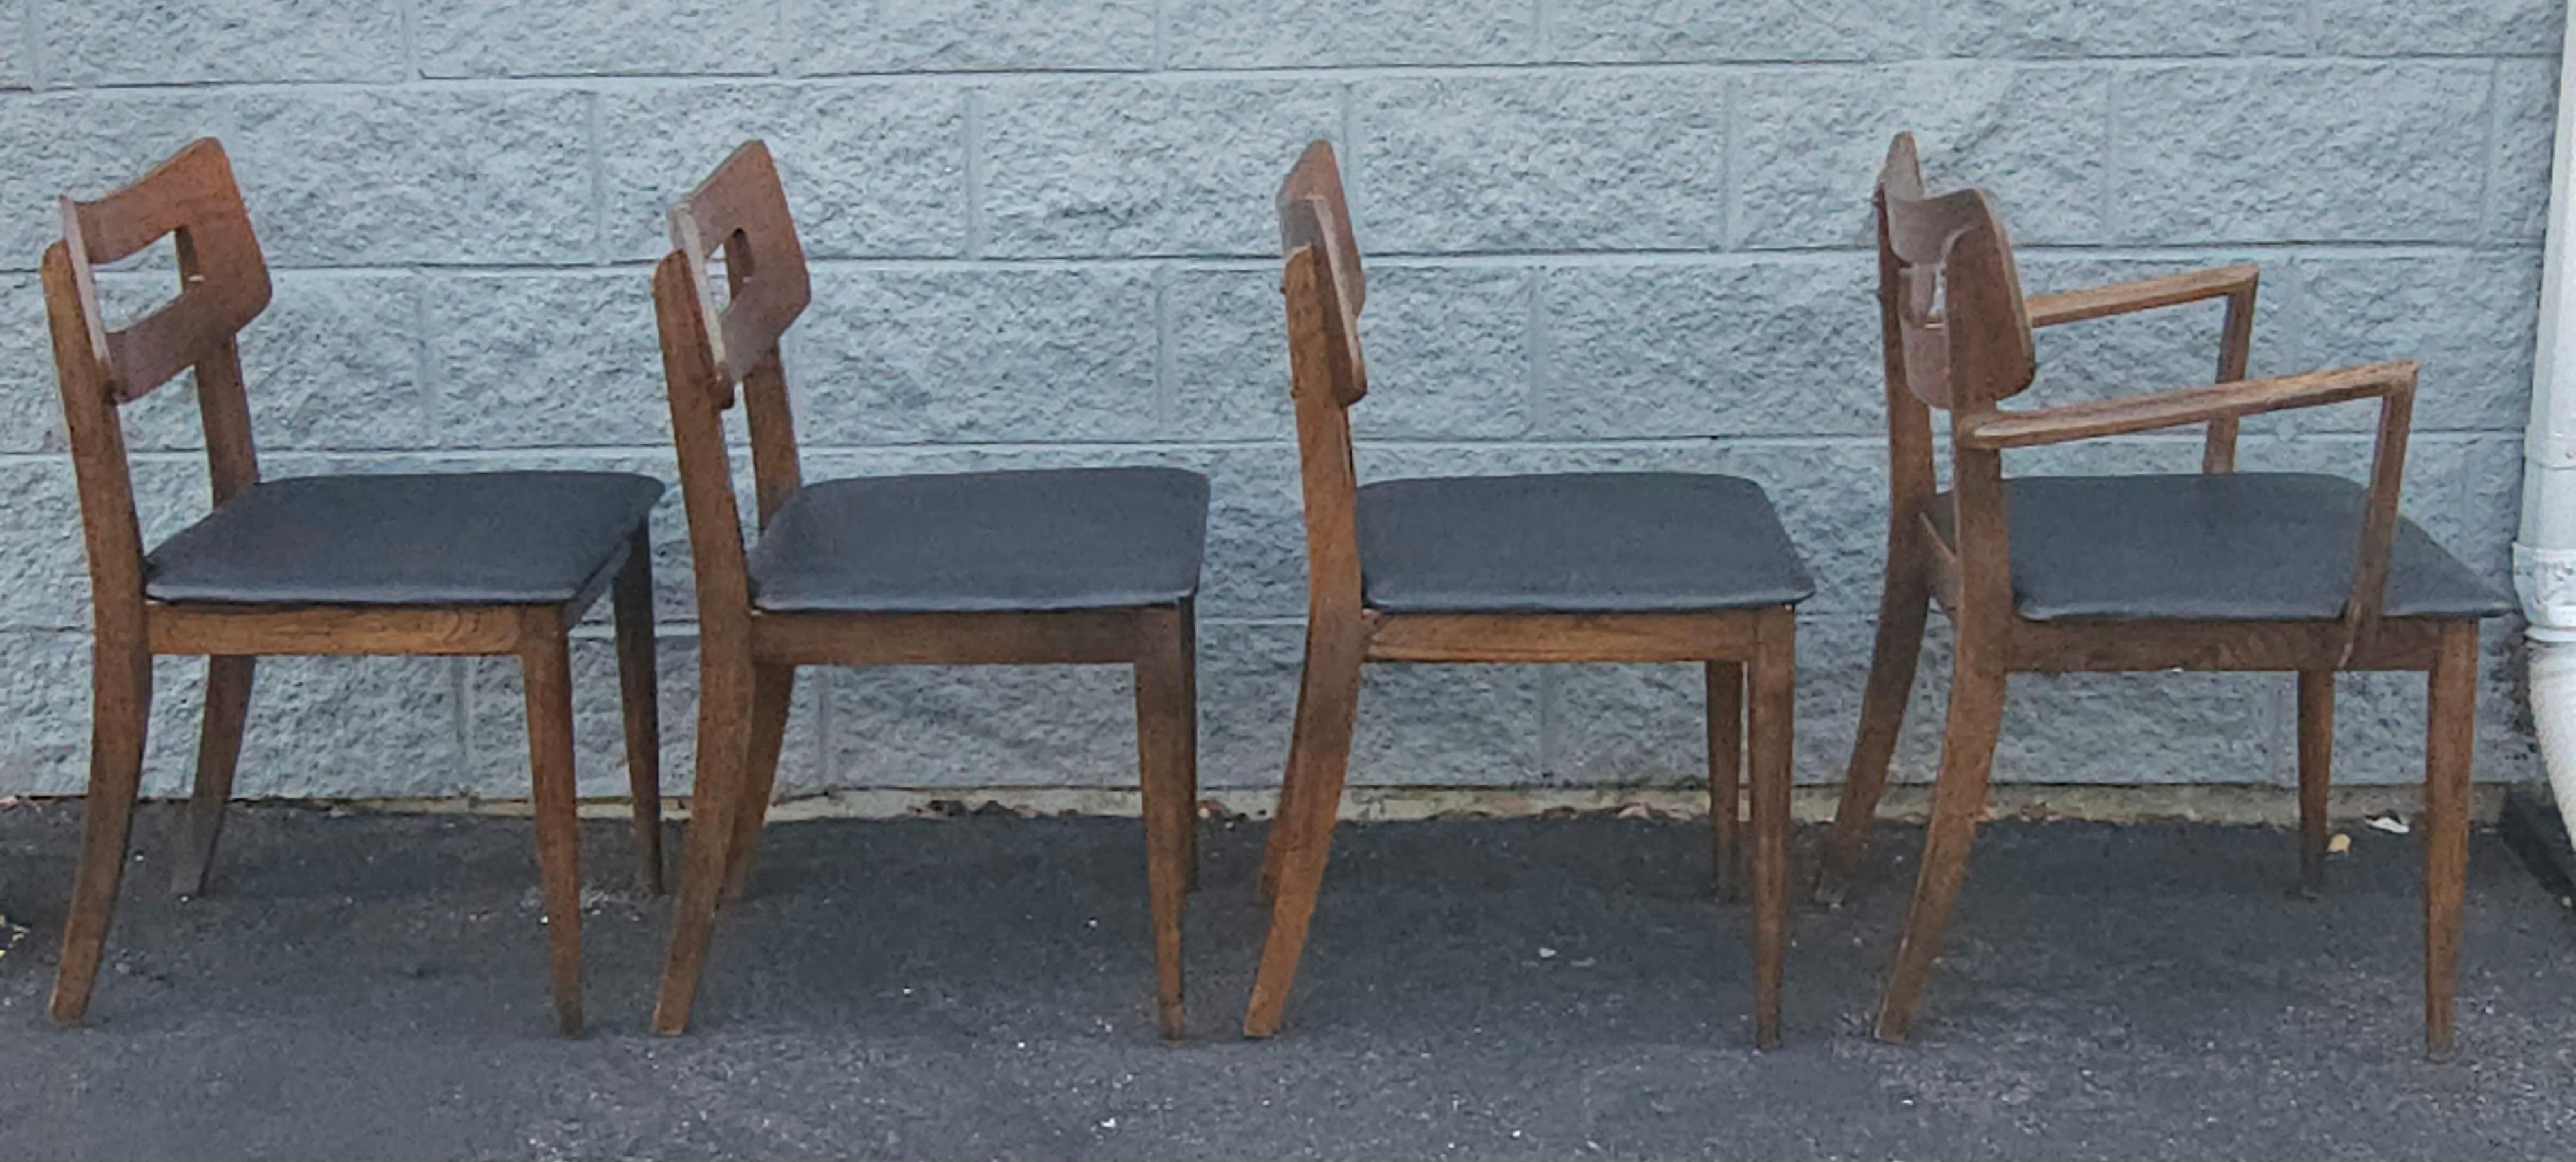 Set of 4 Mid Century Walnut and Vinyl Seat Upholstered Chairs In Good Condition For Sale In Germantown, MD